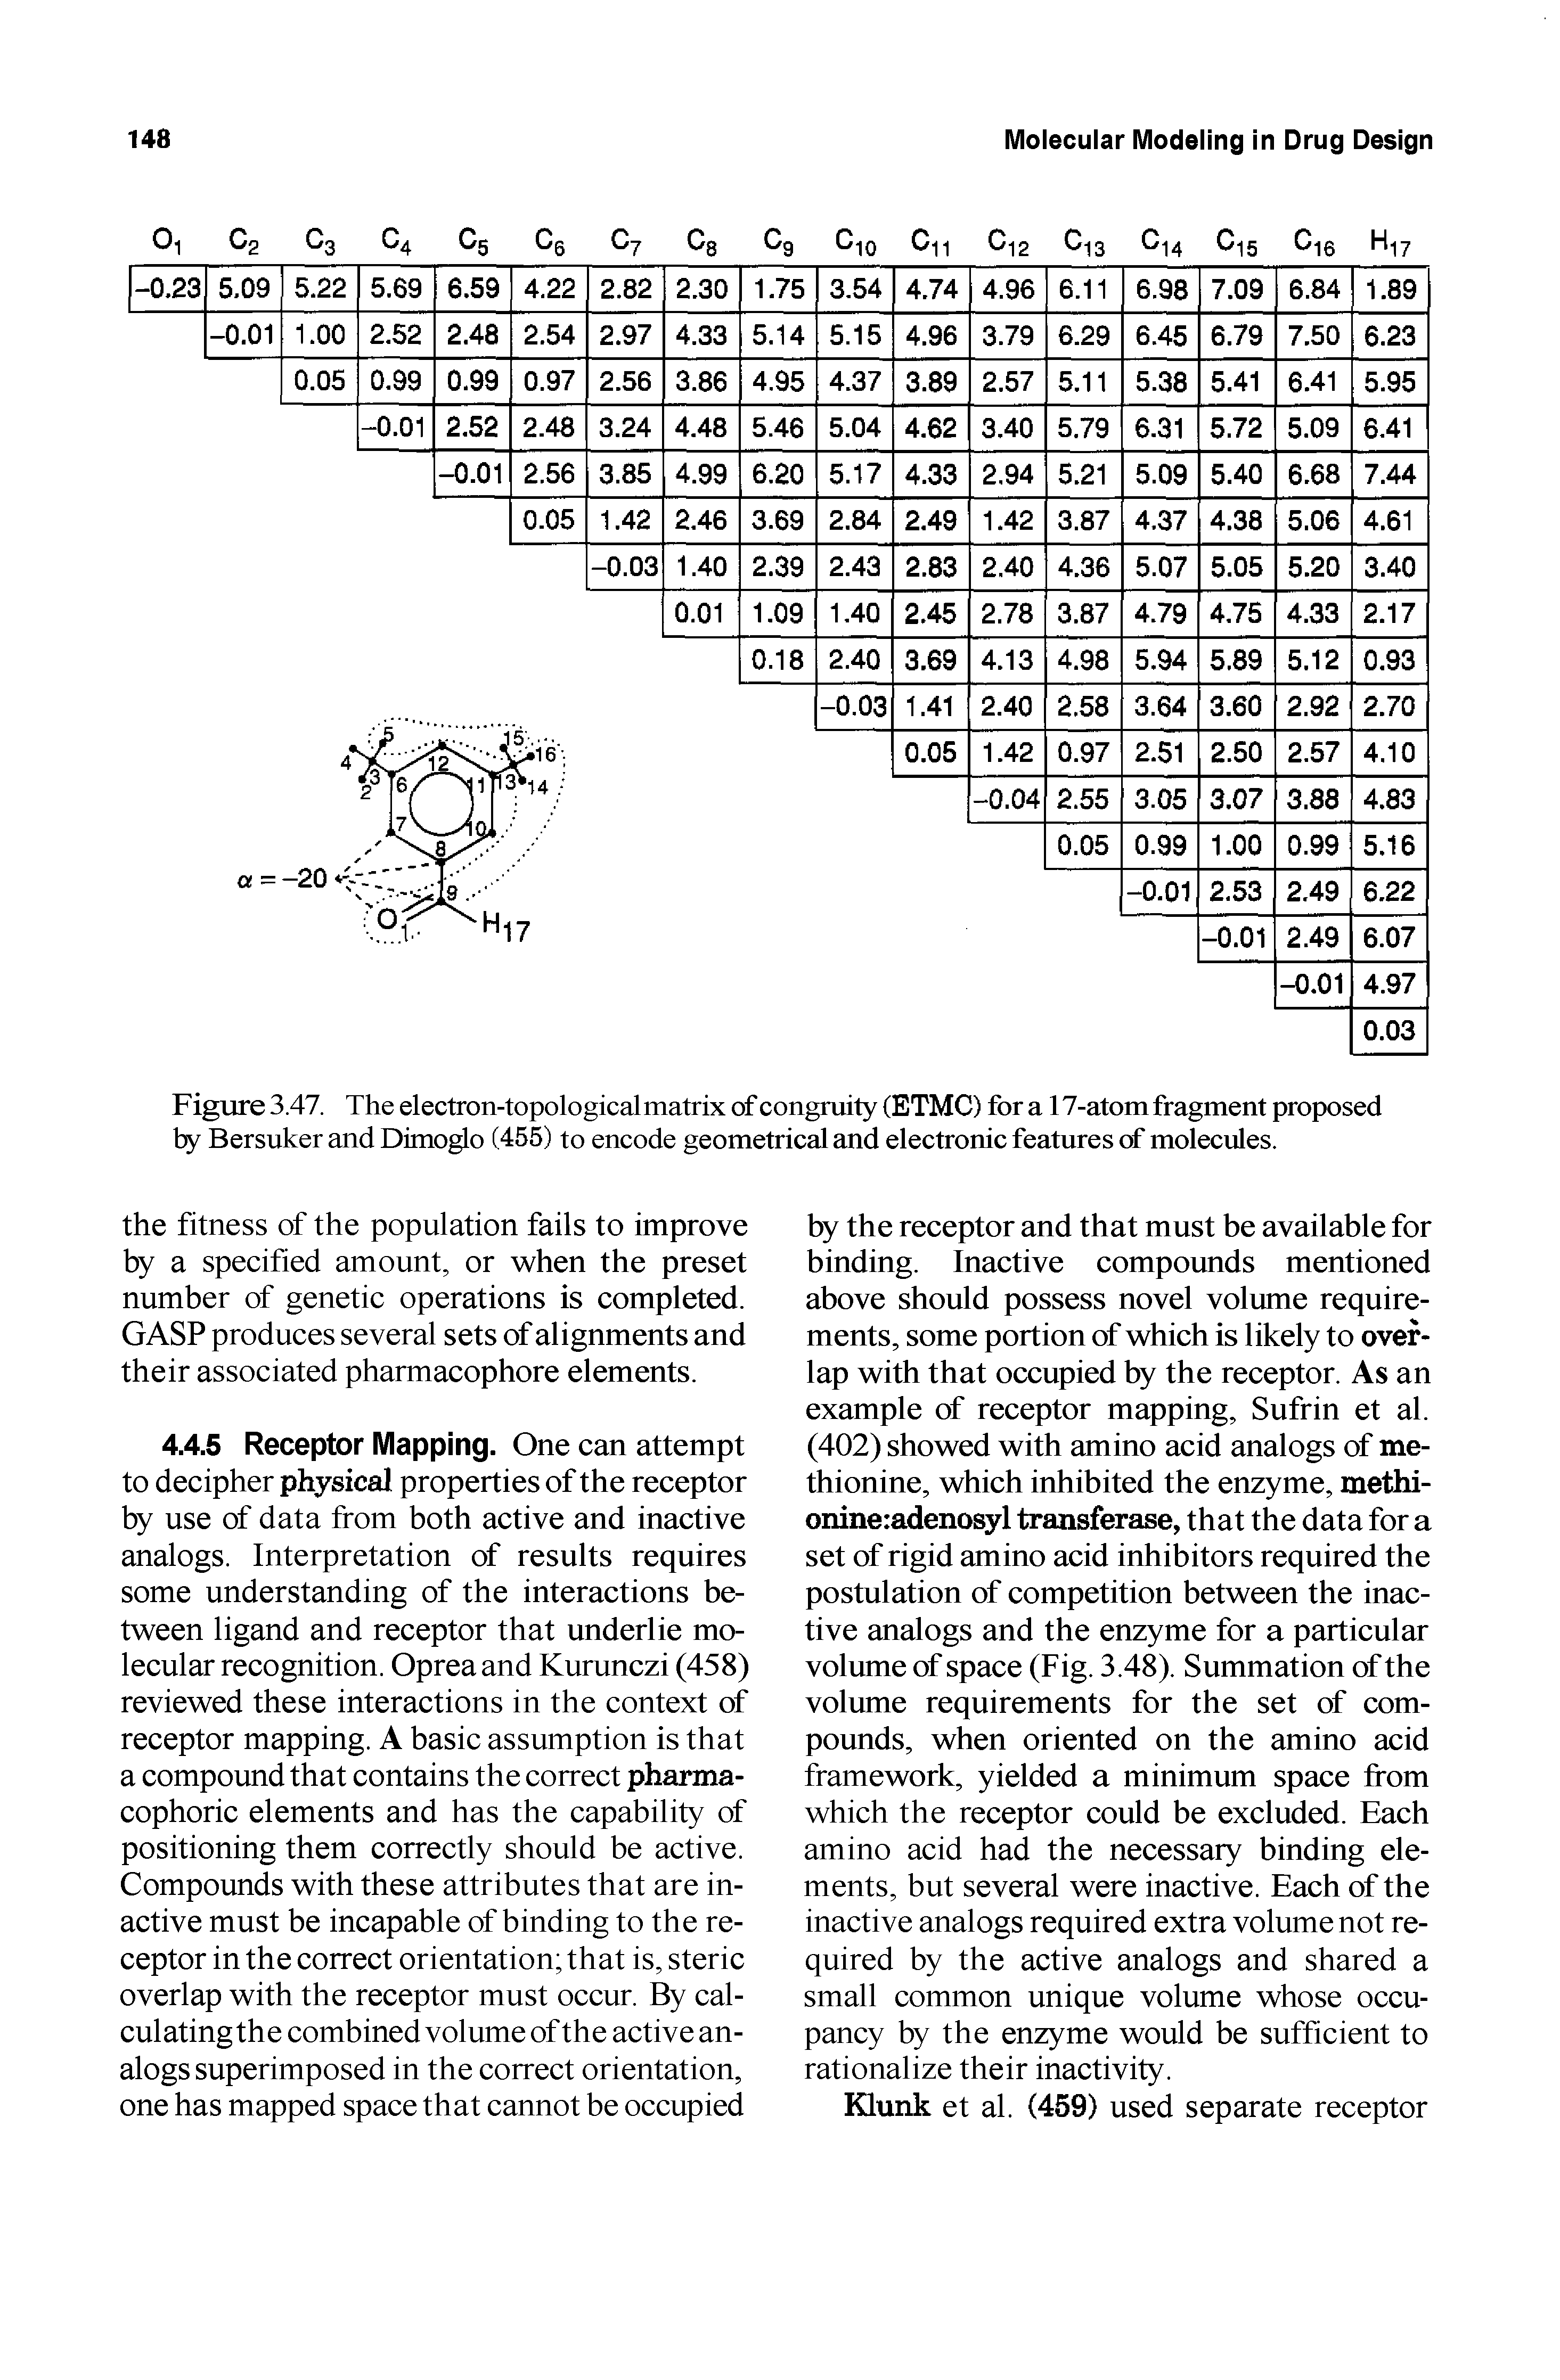 Figure 3.47. The electron-topological matrix of congruity (ETMC) for a 17-atom fragment proposed by Bersuker and Dimoglo (455) to encode geometrical and electronic features of molecules.